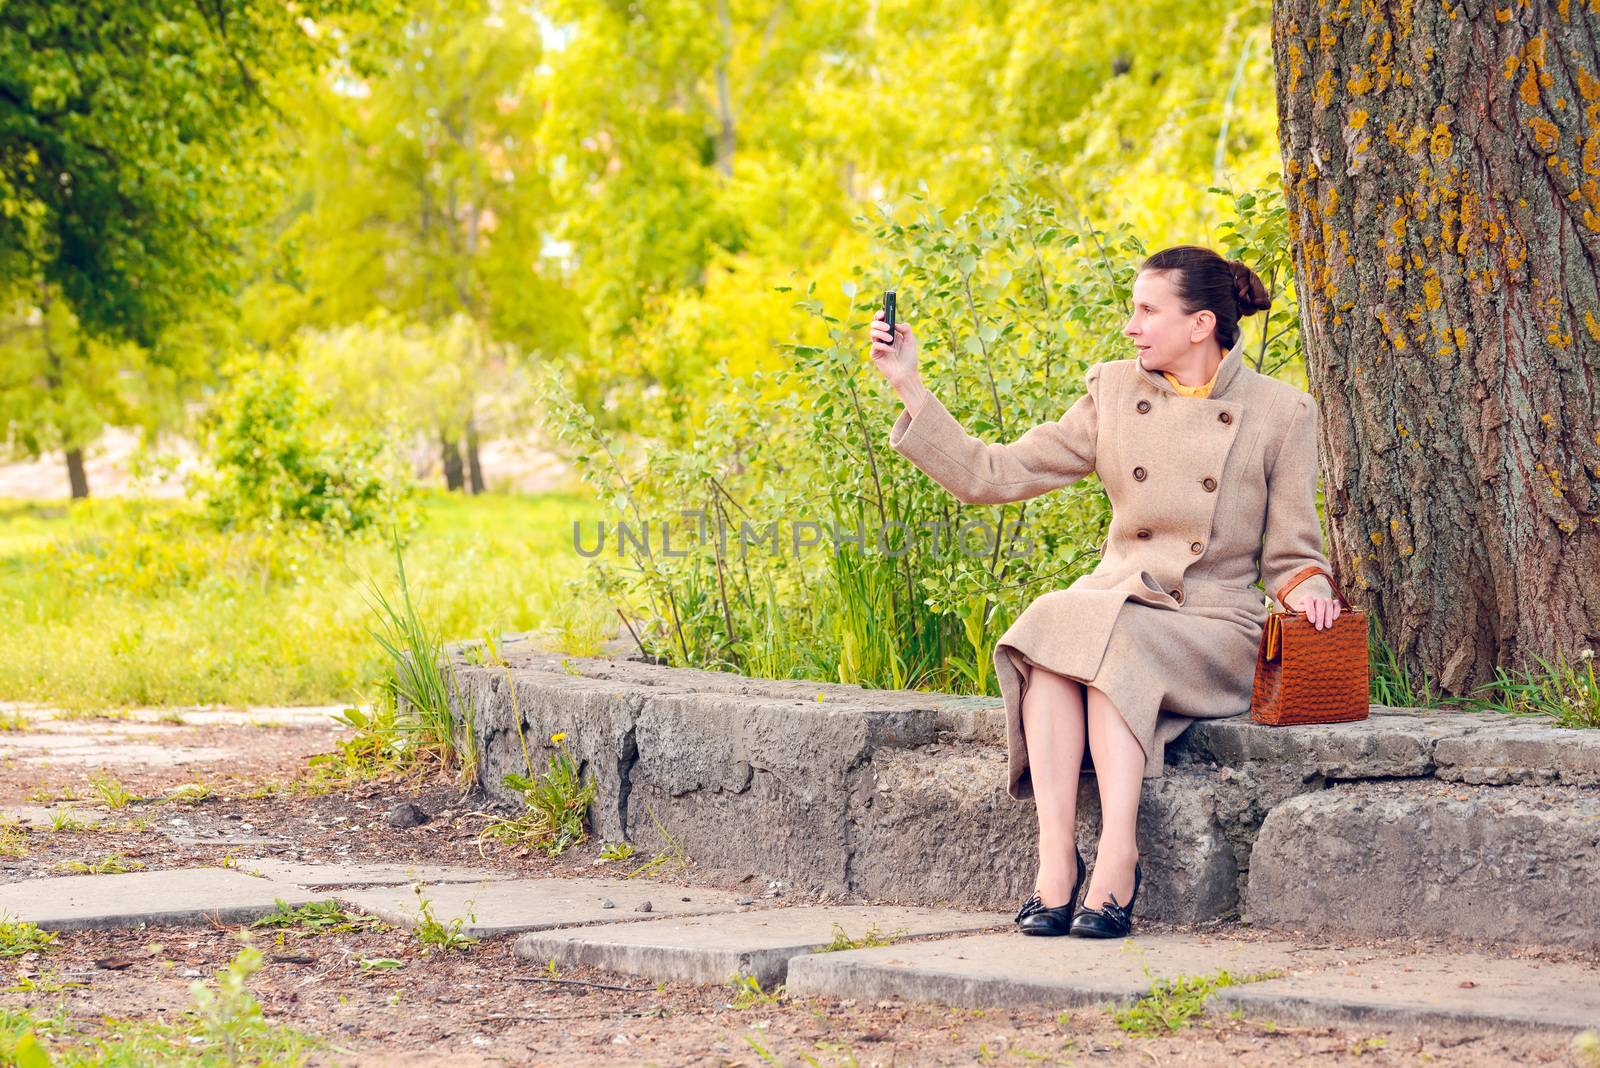 Elegant businesswoman sitting on a stone wall during a sunny spring day, and shooting a photo with her mobile phone